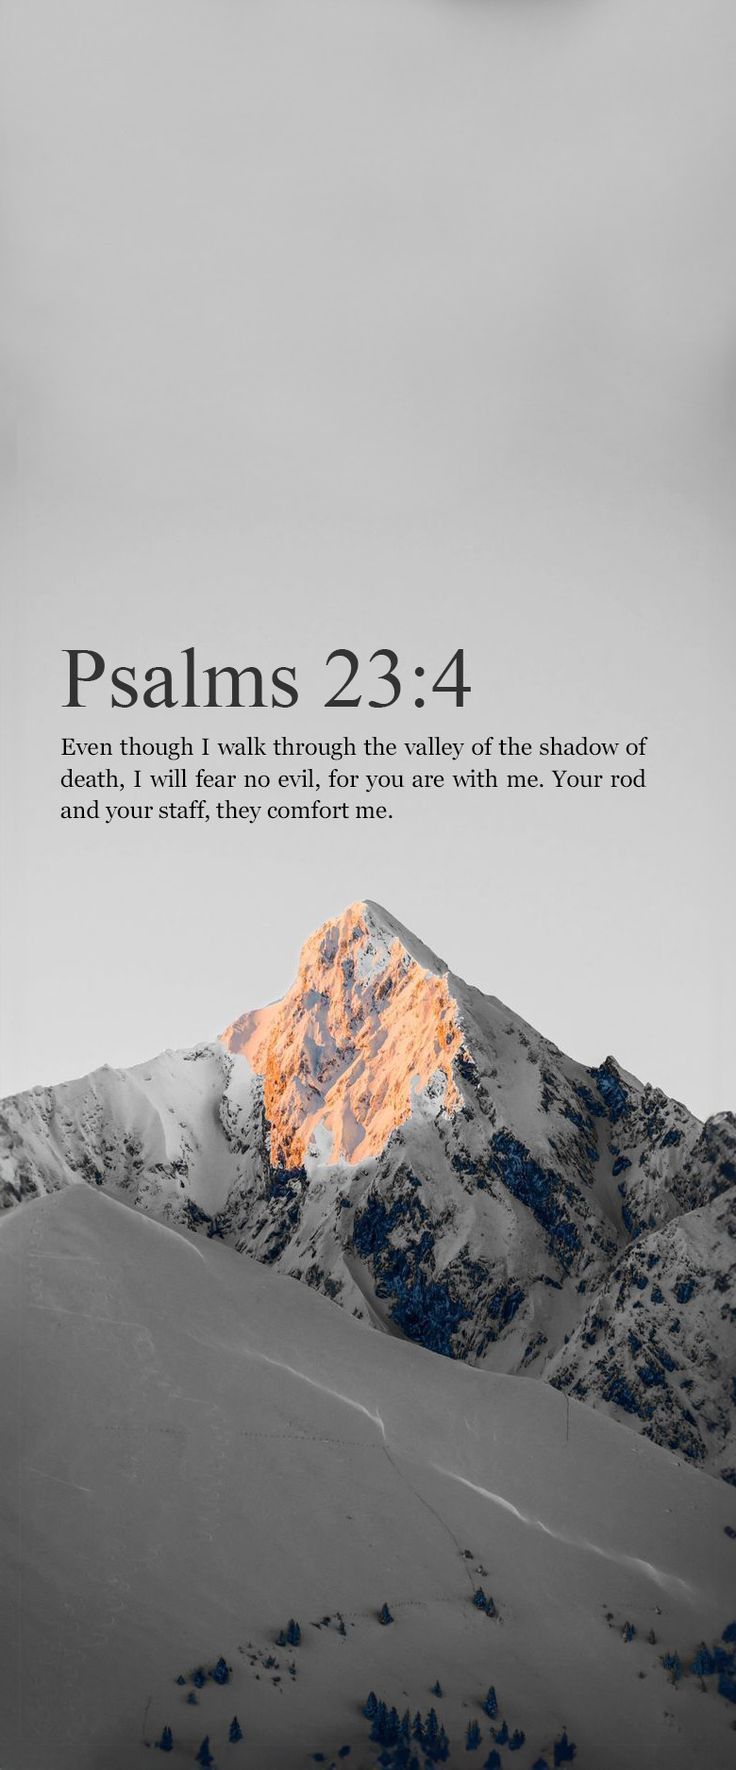 Men's Wallpapers For Phone, Palm 23:4 Bible Verse, Christian Wallpaper Psalm 23, Mark 8:36 Wallpaper, Psalm 28 7 Wallpaper, Man Of God Bible Verse, Lord Wallpaper Aesthetic, Crosses Wallpaper Backgrounds, Palms 91 Bible Verse